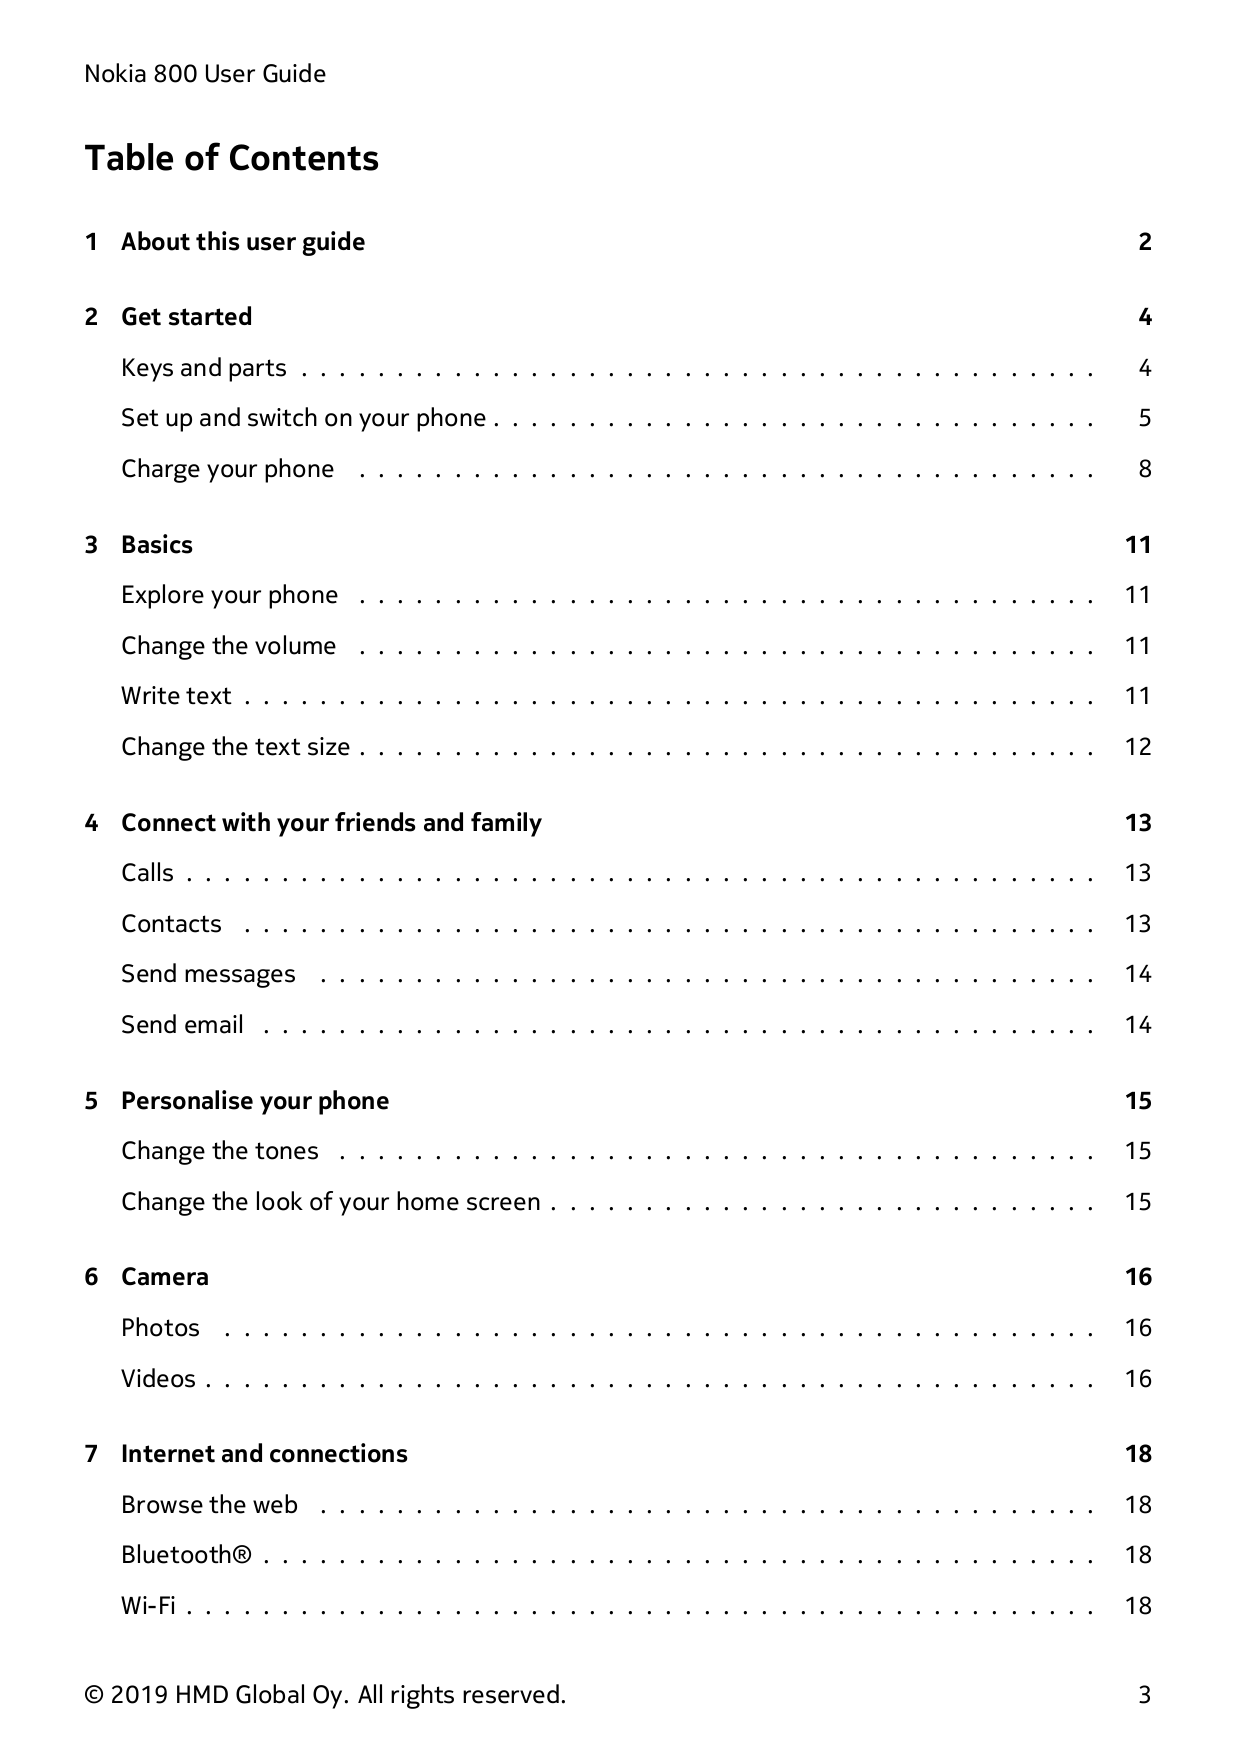 Nokia 800 User GuideTable of Contents1 About this user guide22 Get started4Keys and parts . . . . . . . . . . . . . . . . . . . 